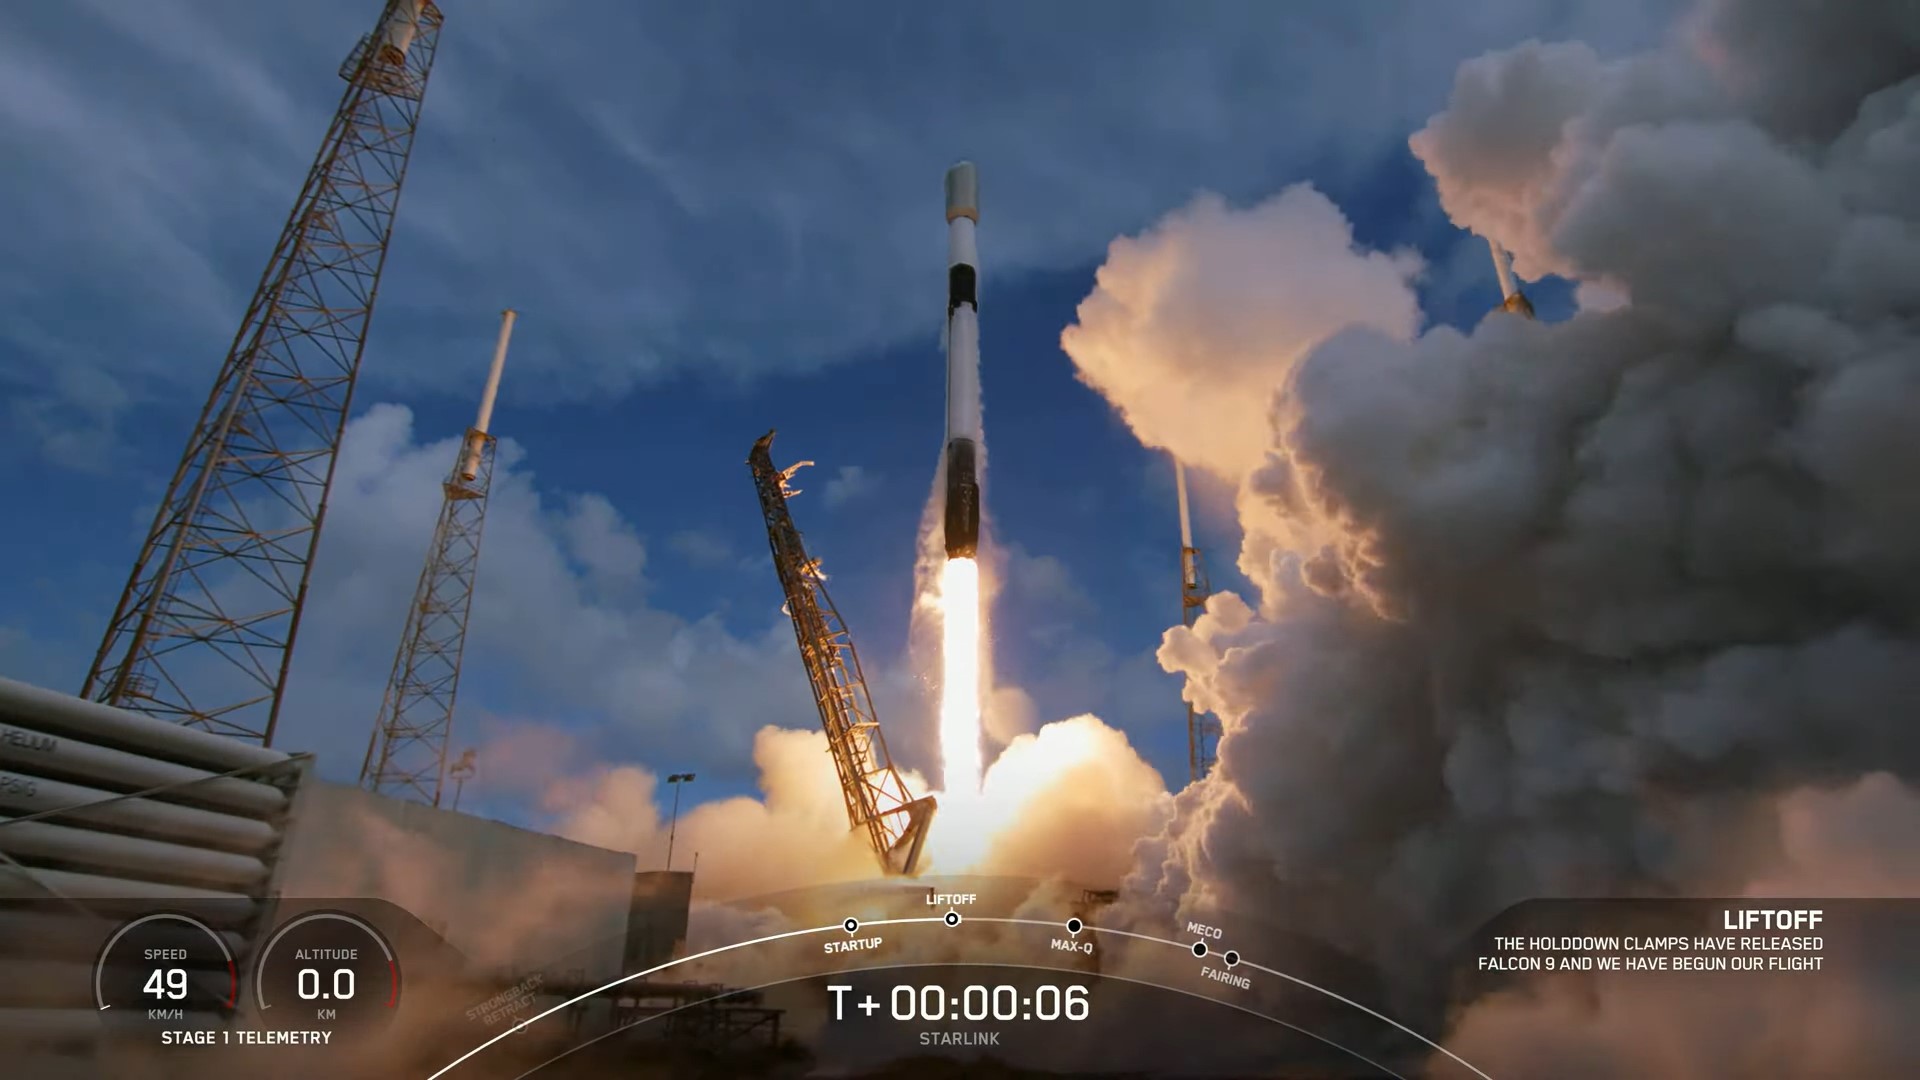 A Falcon 9 rocket carrying Starlink satellites blasted off on July 17, 2022.